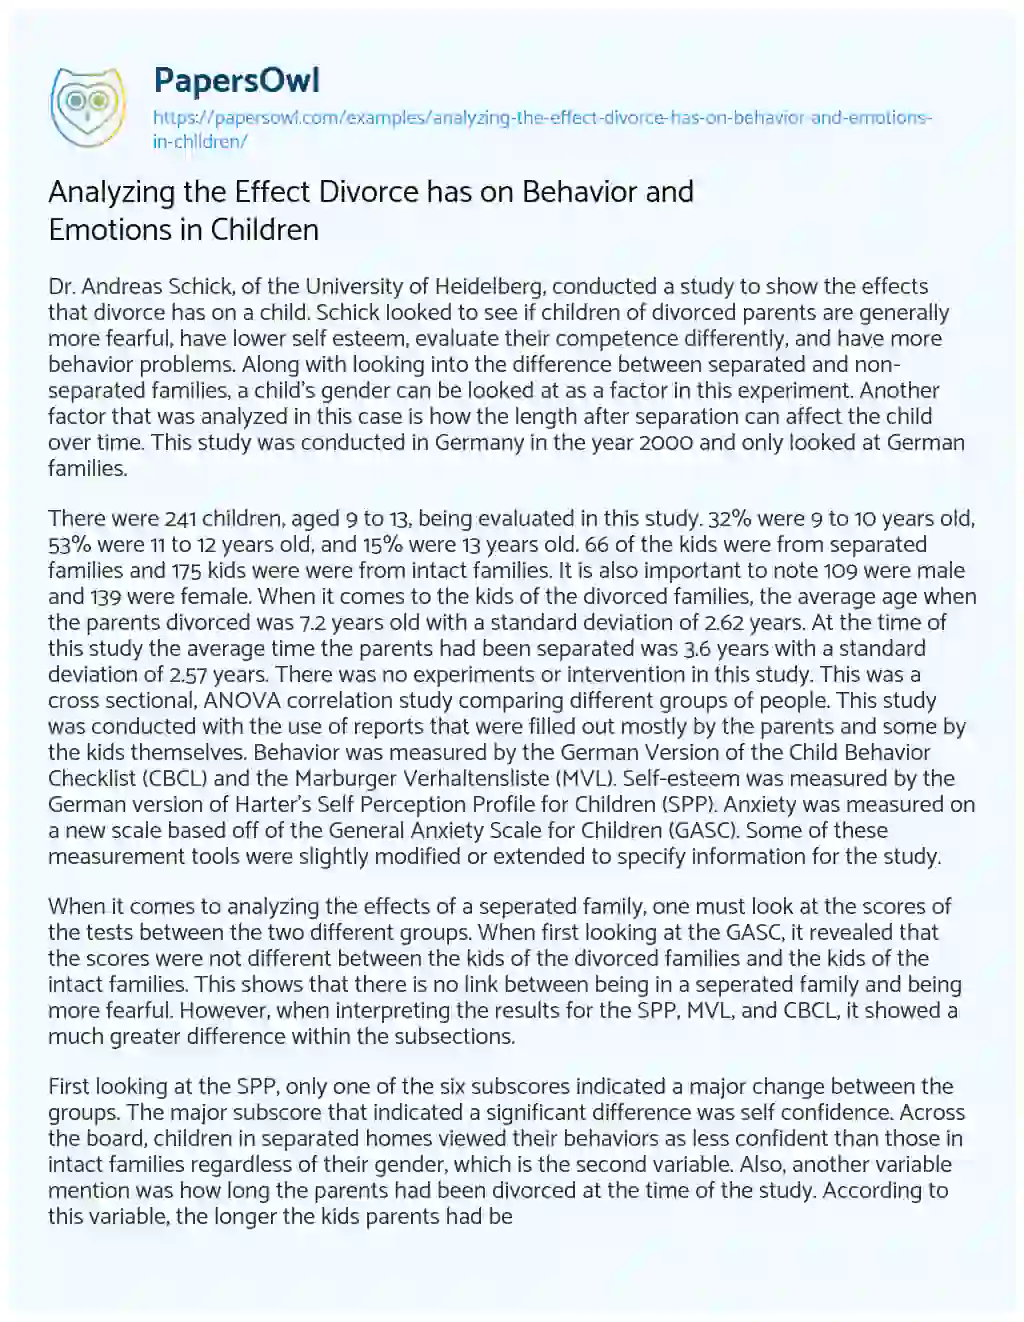 Analyzing the Effect Divorce has on Behavior and Emotions in Children essay